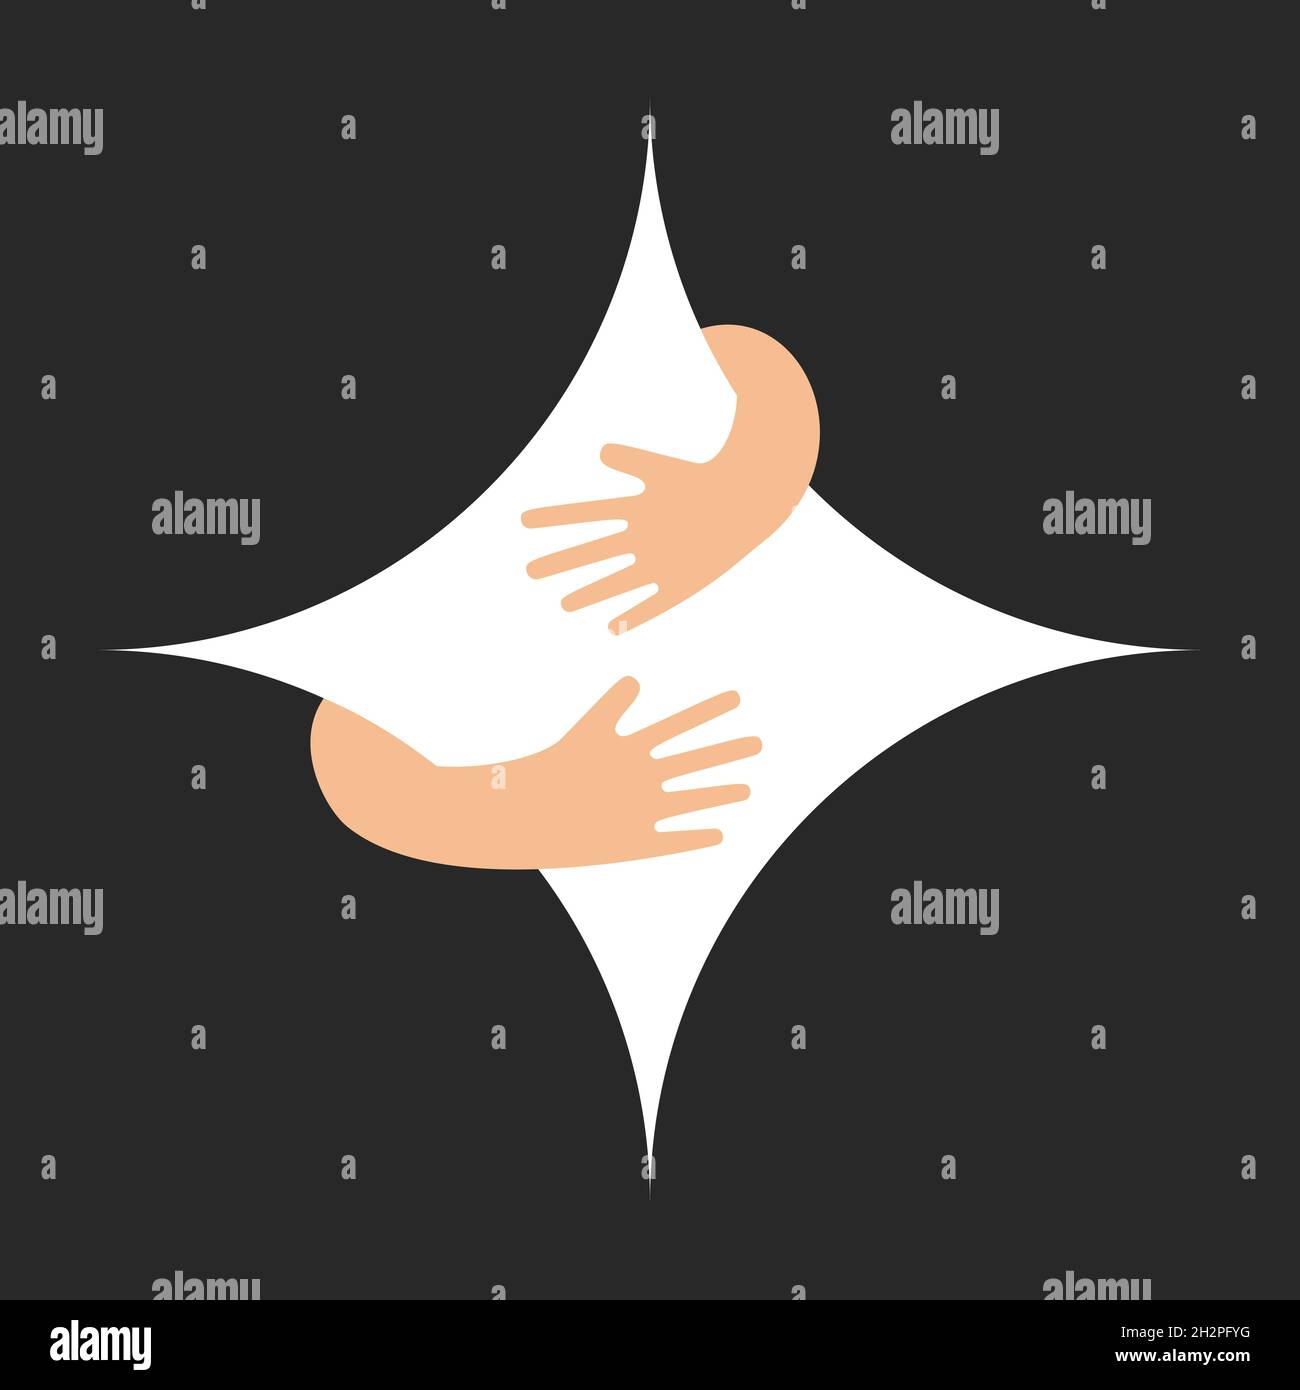 Human hands embracing or holding square with concave sides vector flat illustration isolated on black background. Creative emblem with white big rhomb and hugging arms. Logo with a hug. Stock Vector